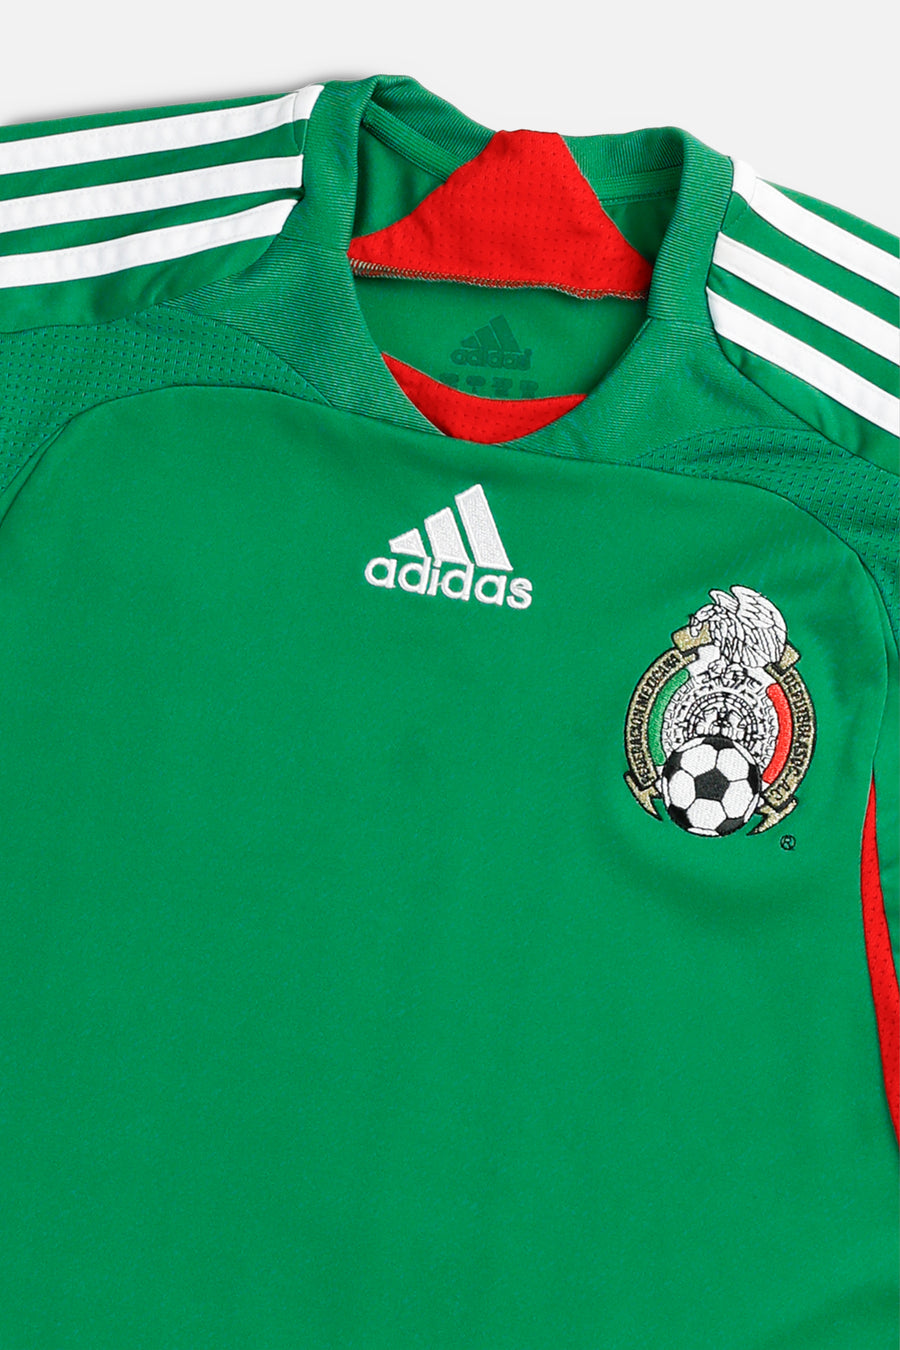 Adidas Mexico Soccer Jersey - M